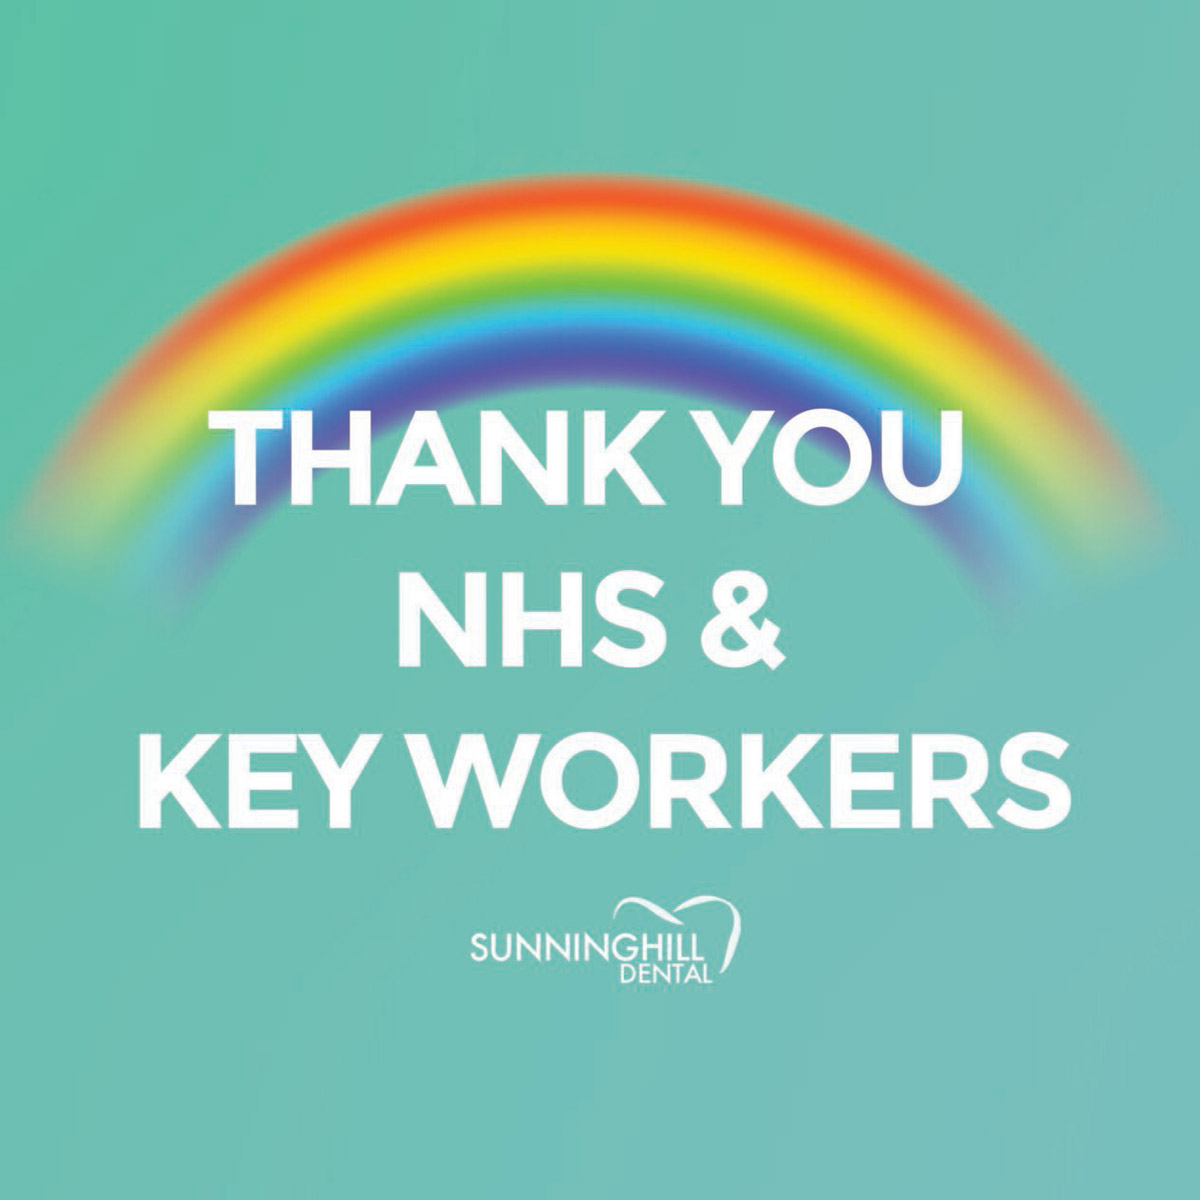 Thank you NHS & Key Workers